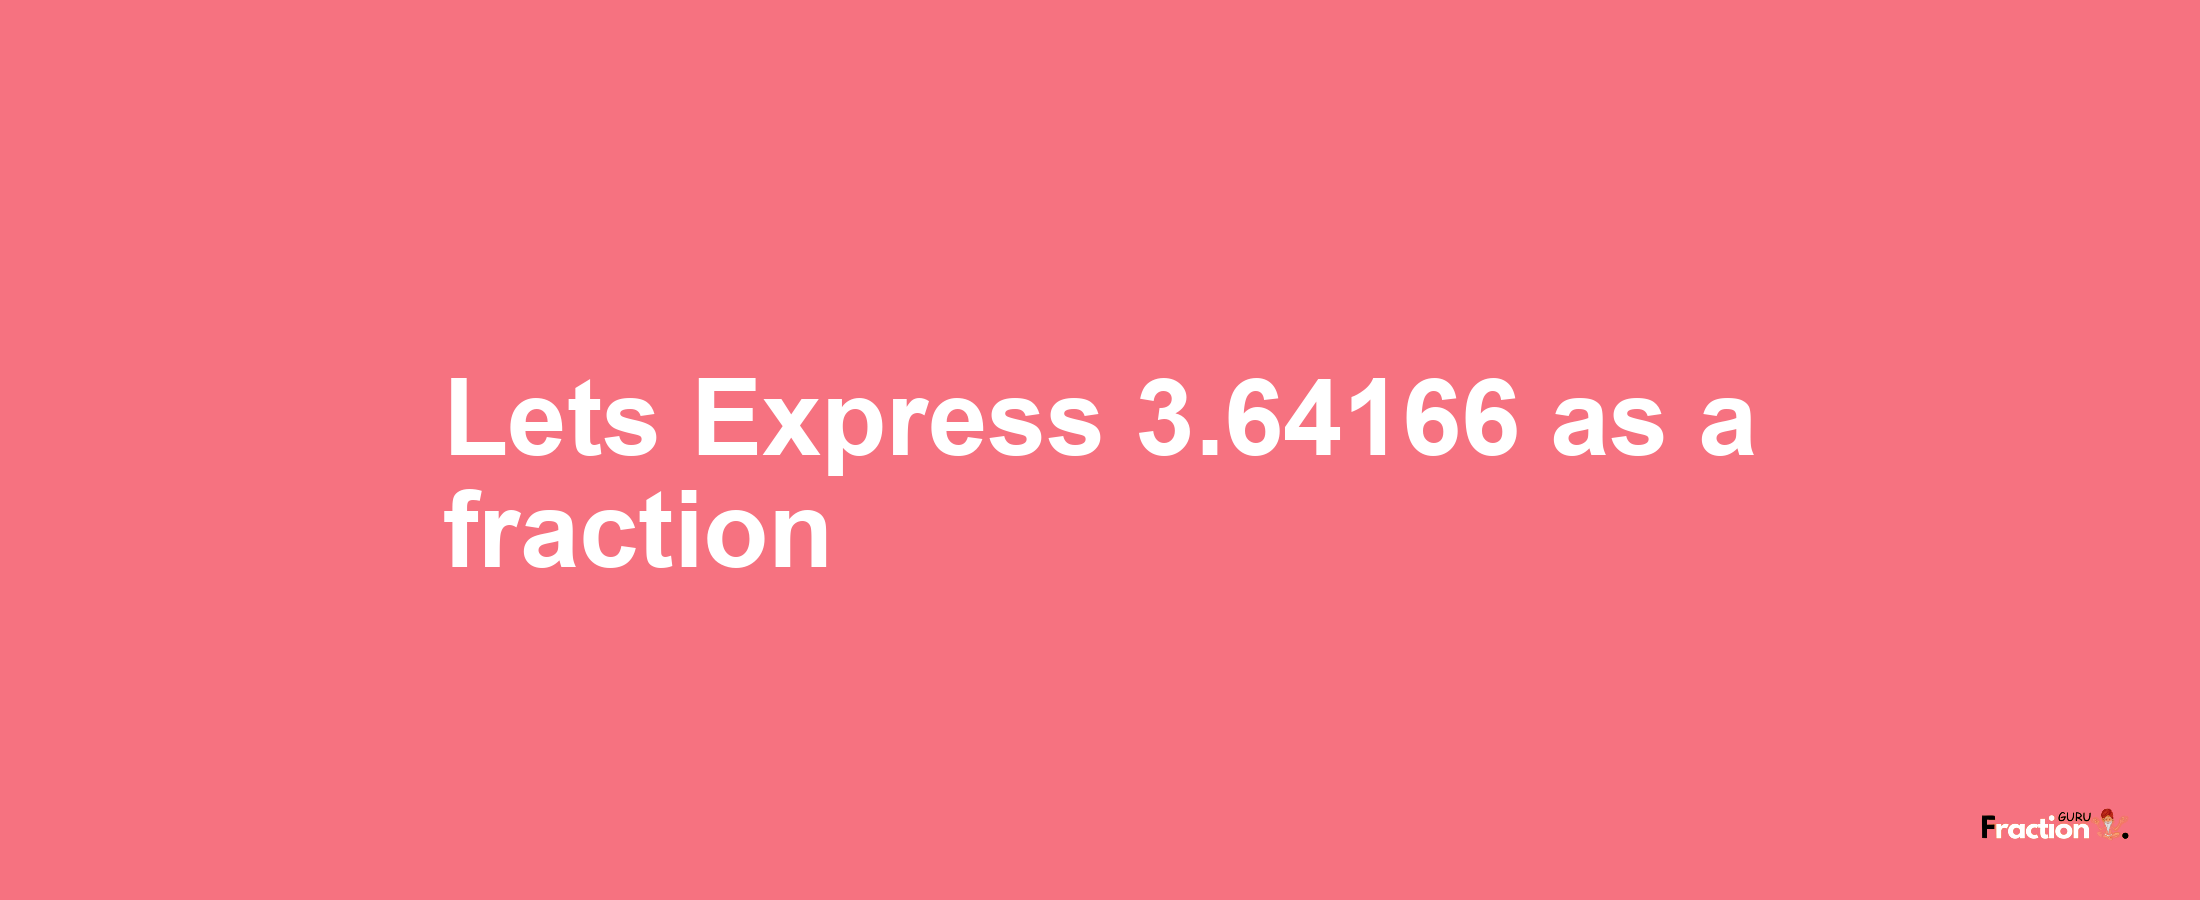 Lets Express 3.64166 as afraction